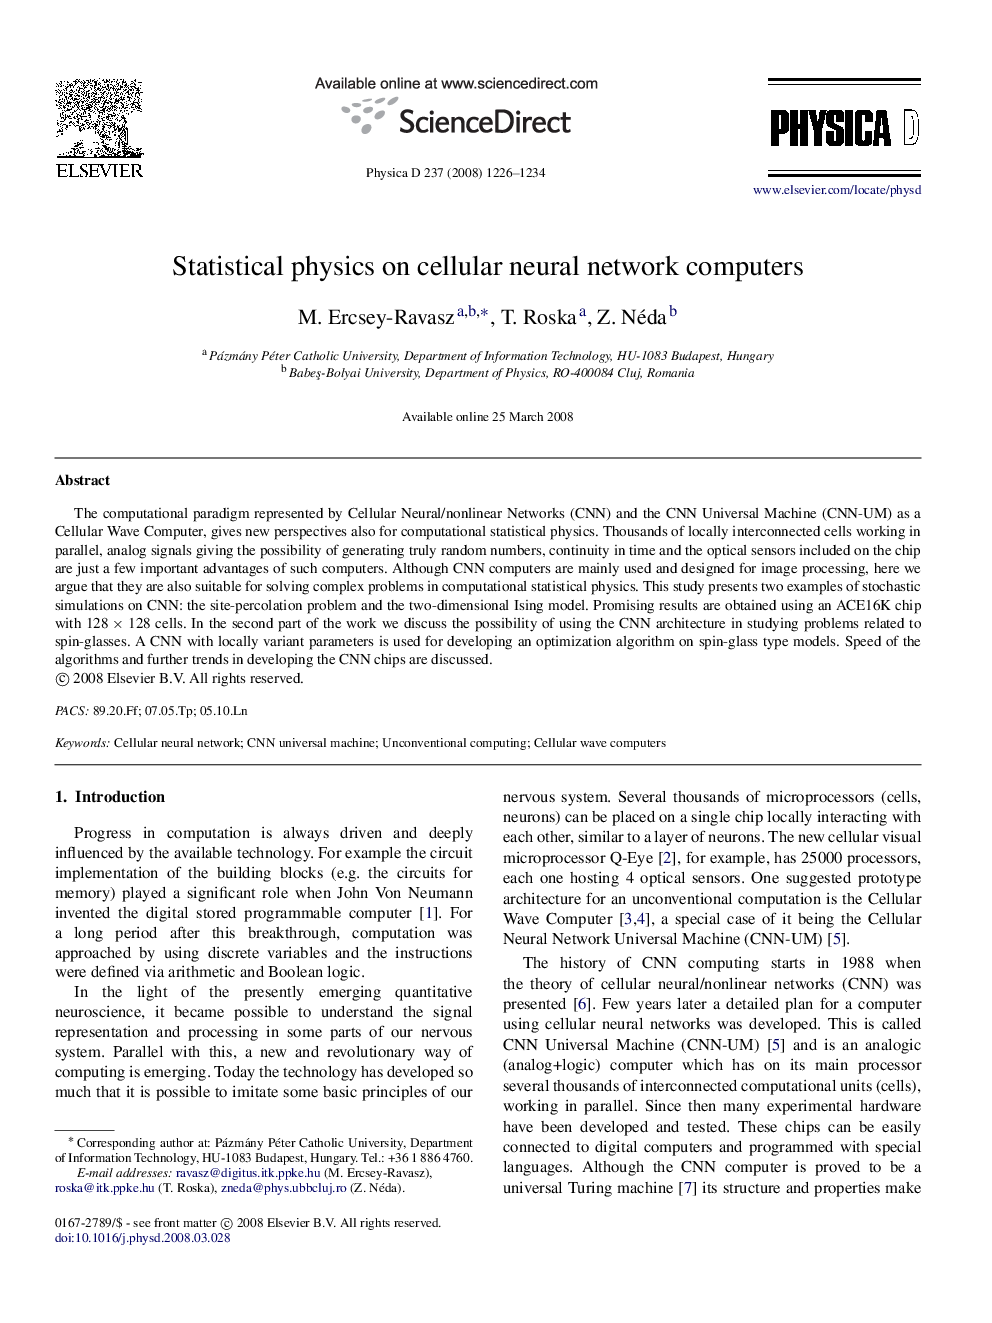 Statistical physics on cellular neural network computers